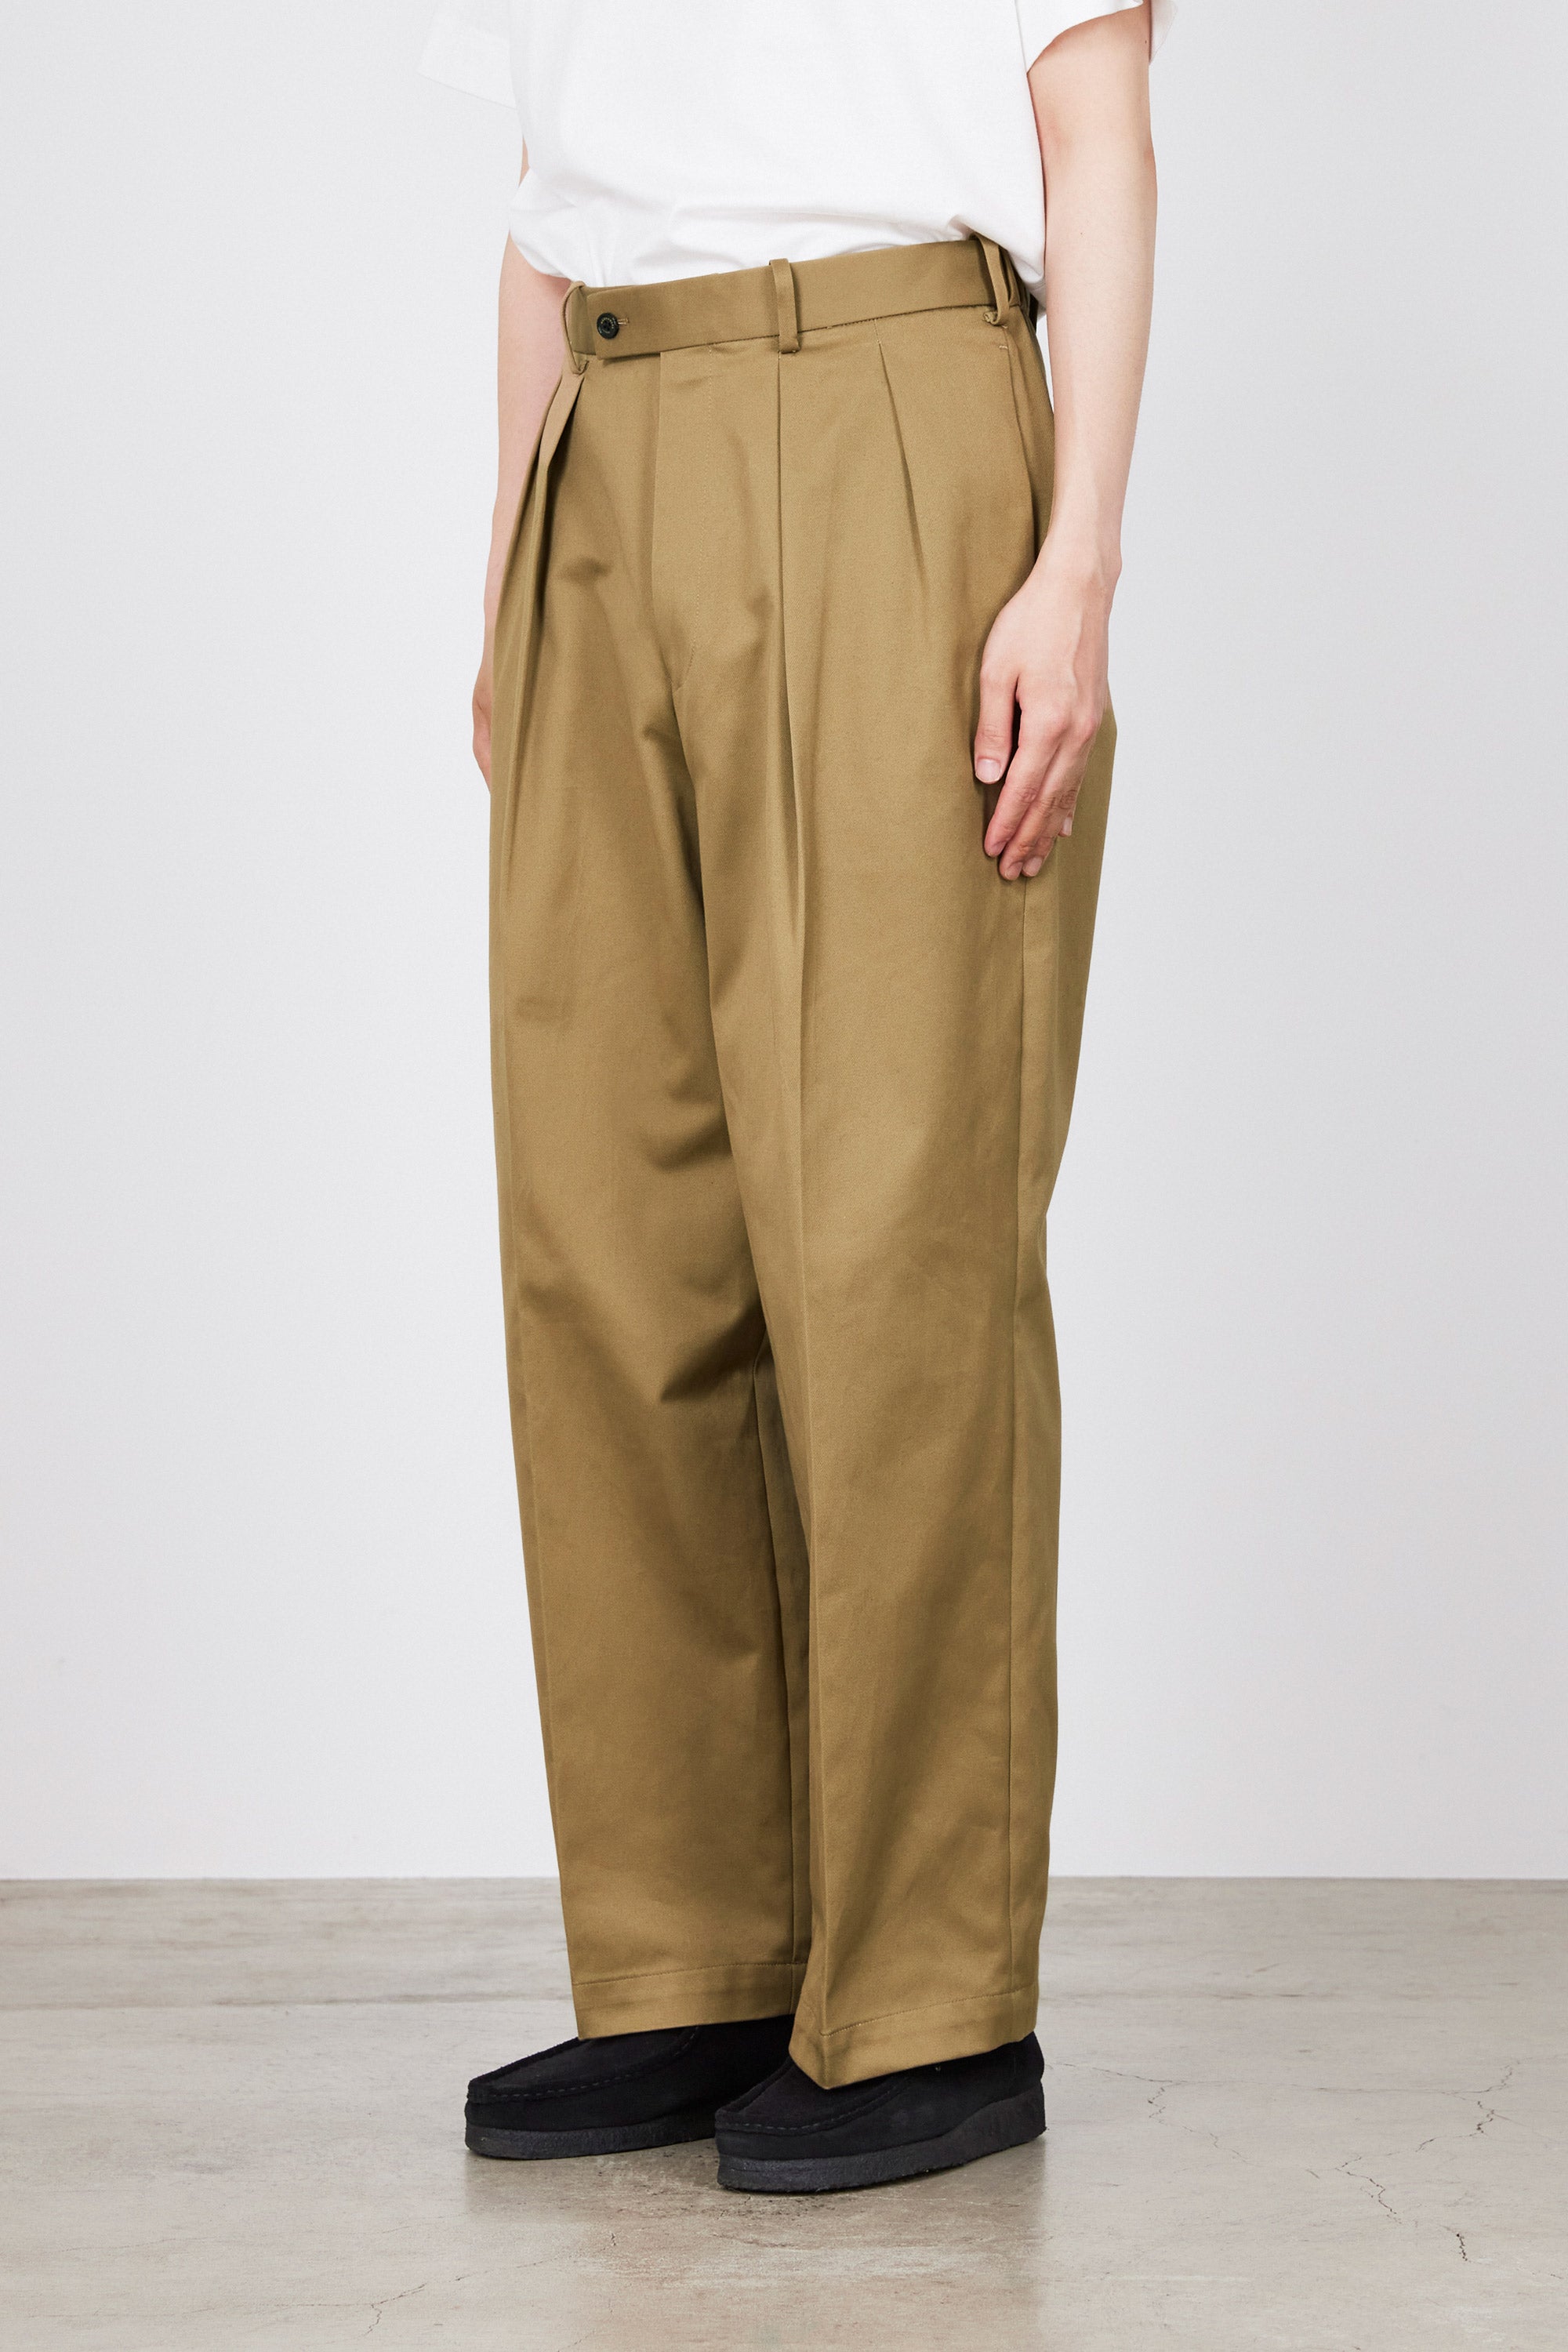 ORGANIC COTTON 30/2 TWILL DOUBLE PLEATED TROUSERS, Beige – MARKAWARE